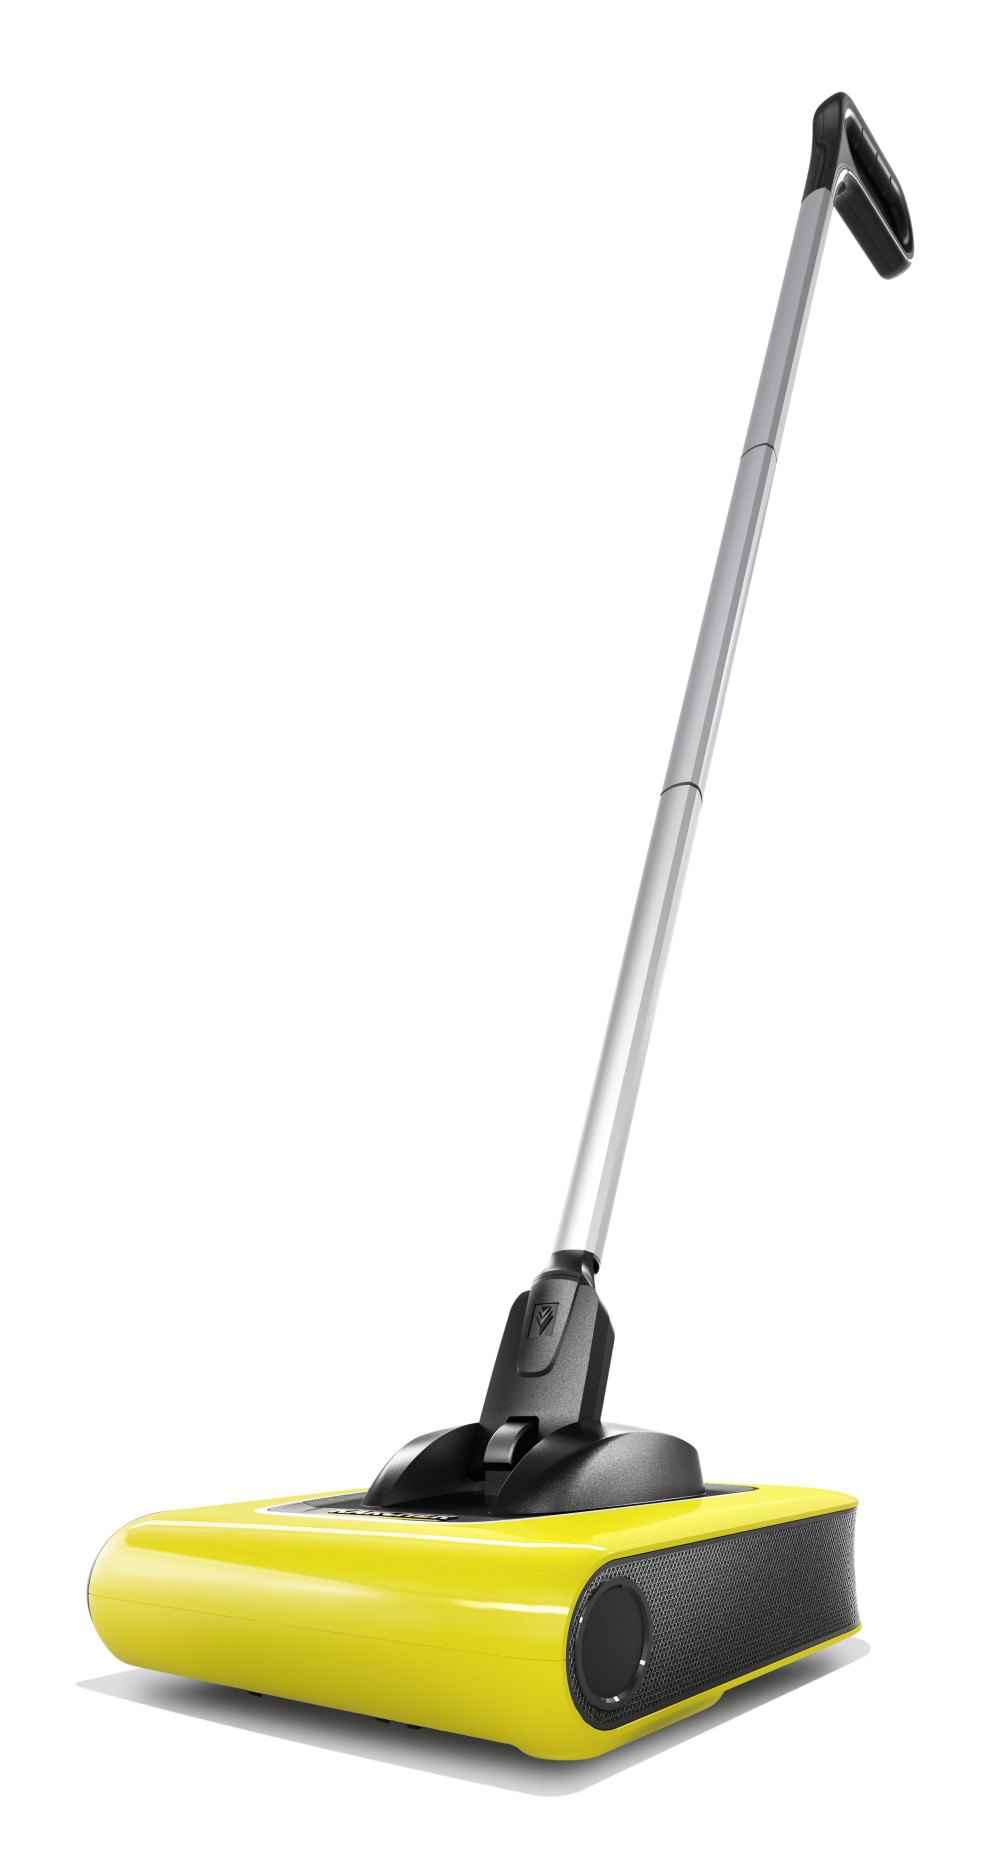 Kärcher KB5 Cordless Electric Broom featured image